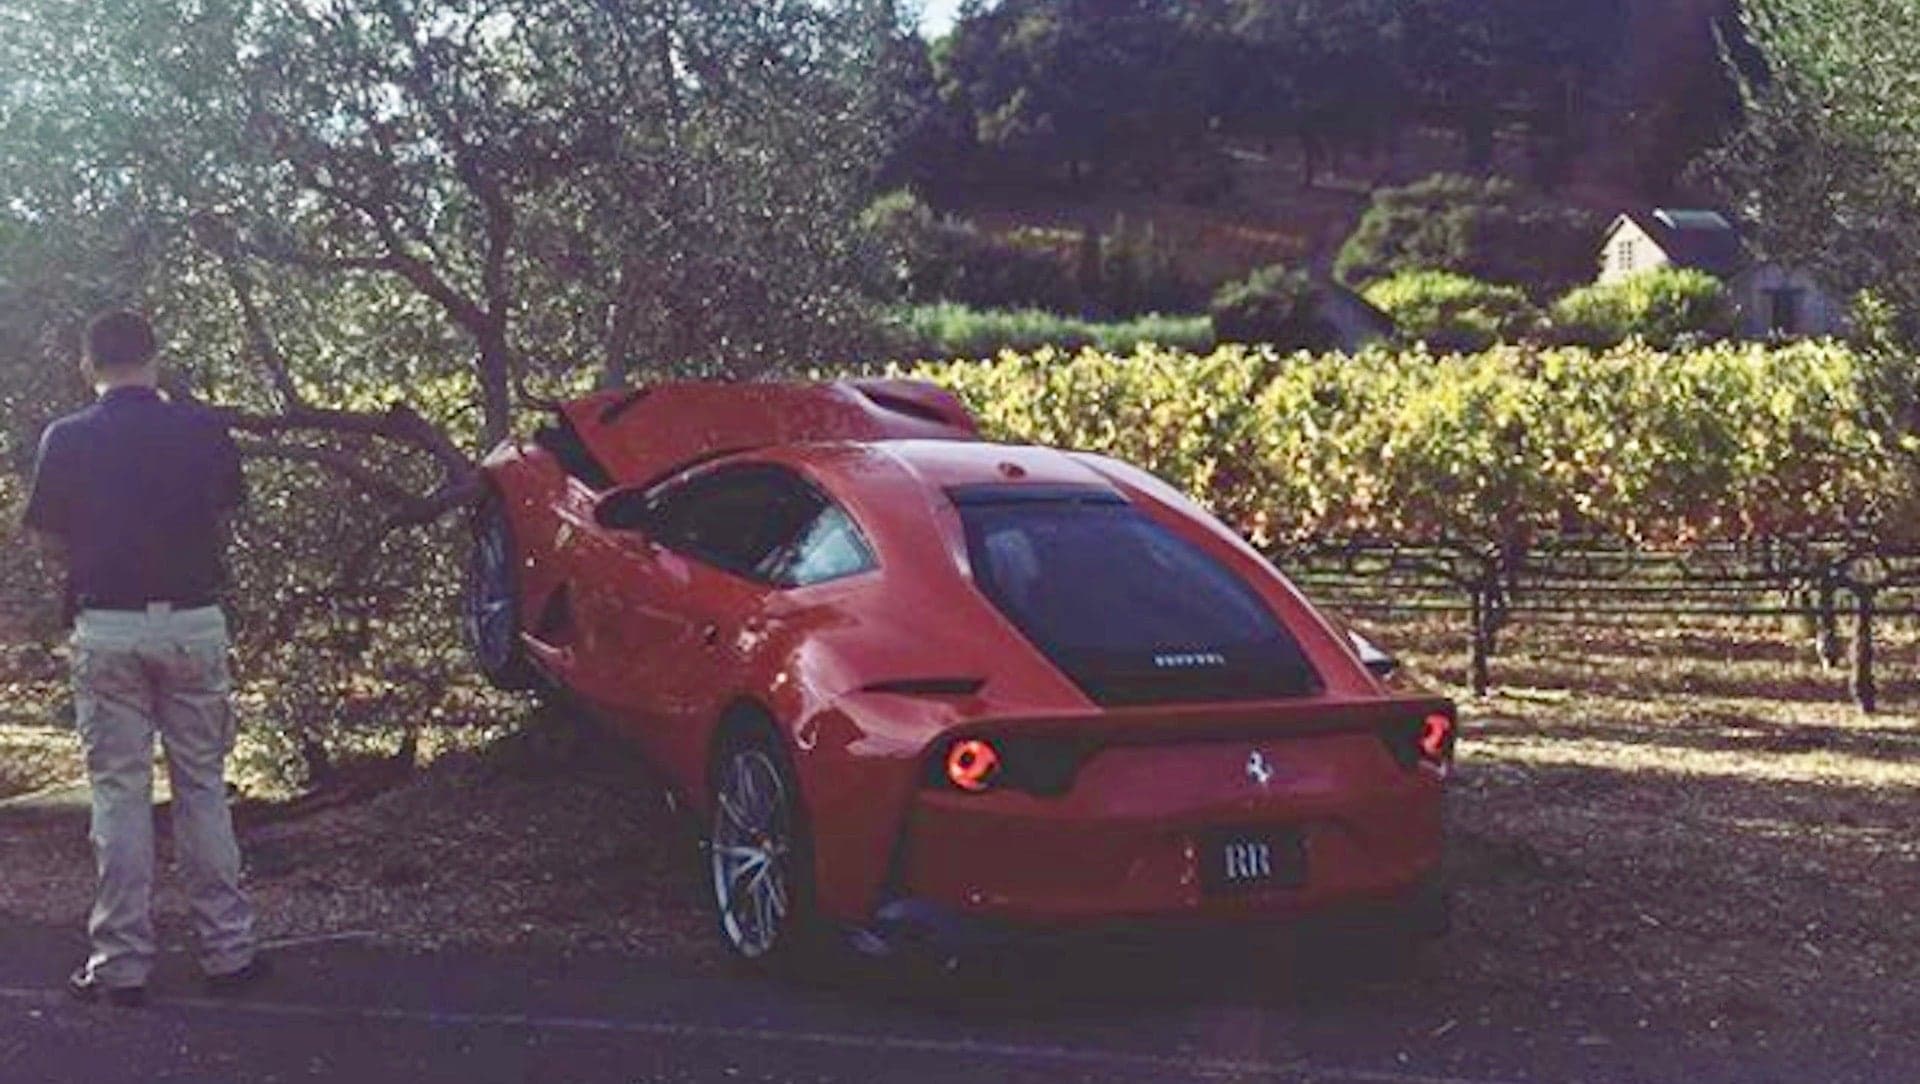 Five Injured, Ferrari 812 Superfast Wrecked in Separate Crashes at Robb Report Event [UPDATED]